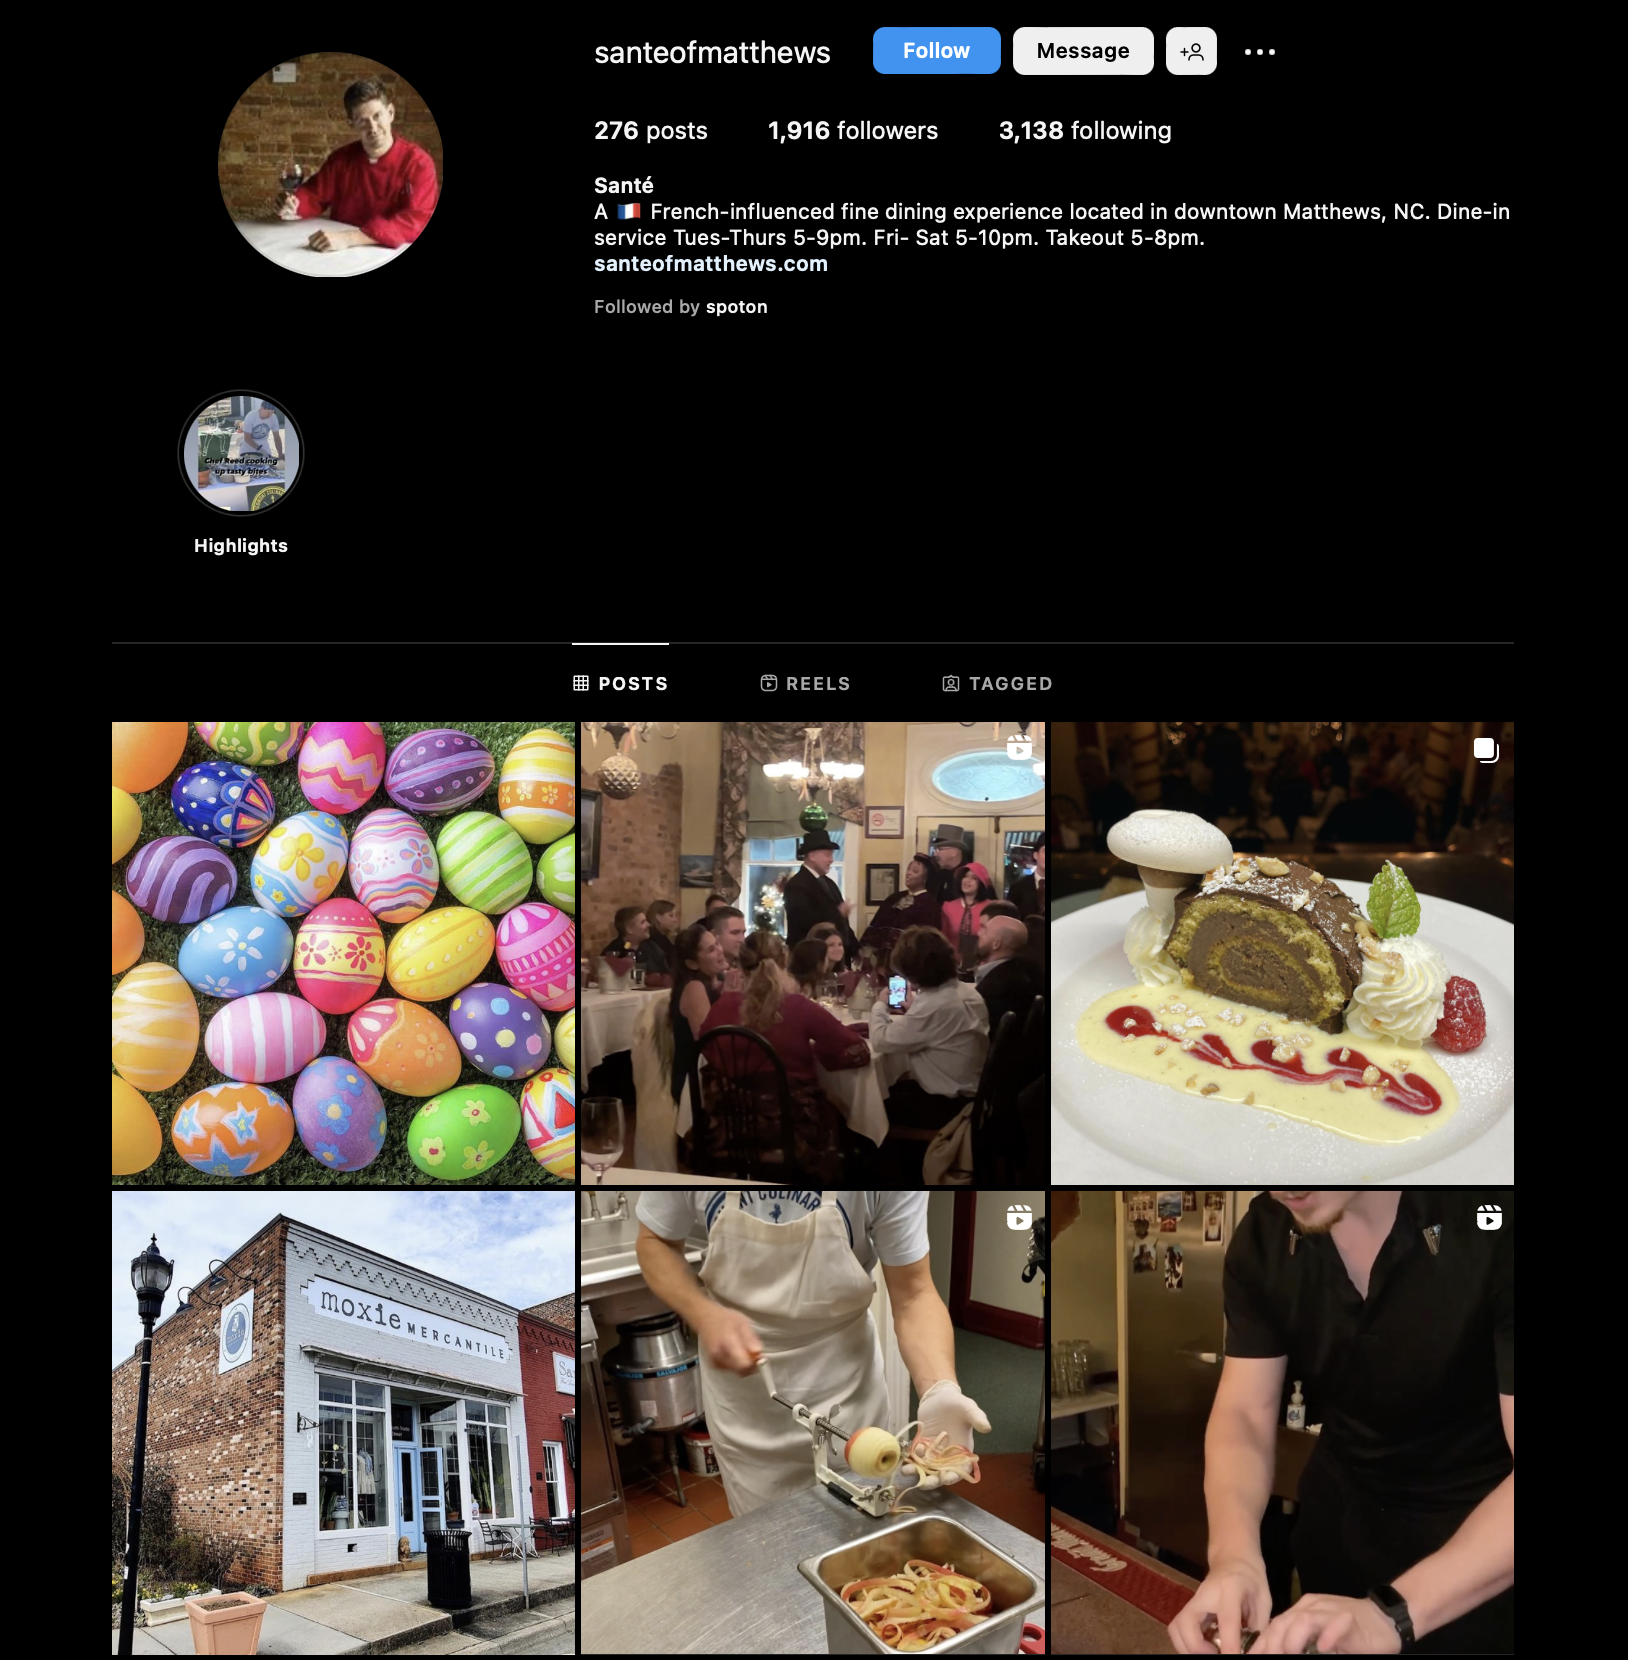 Screenshot of a restaurant Instagram page for Santé, with images of different food, events, and chefs.